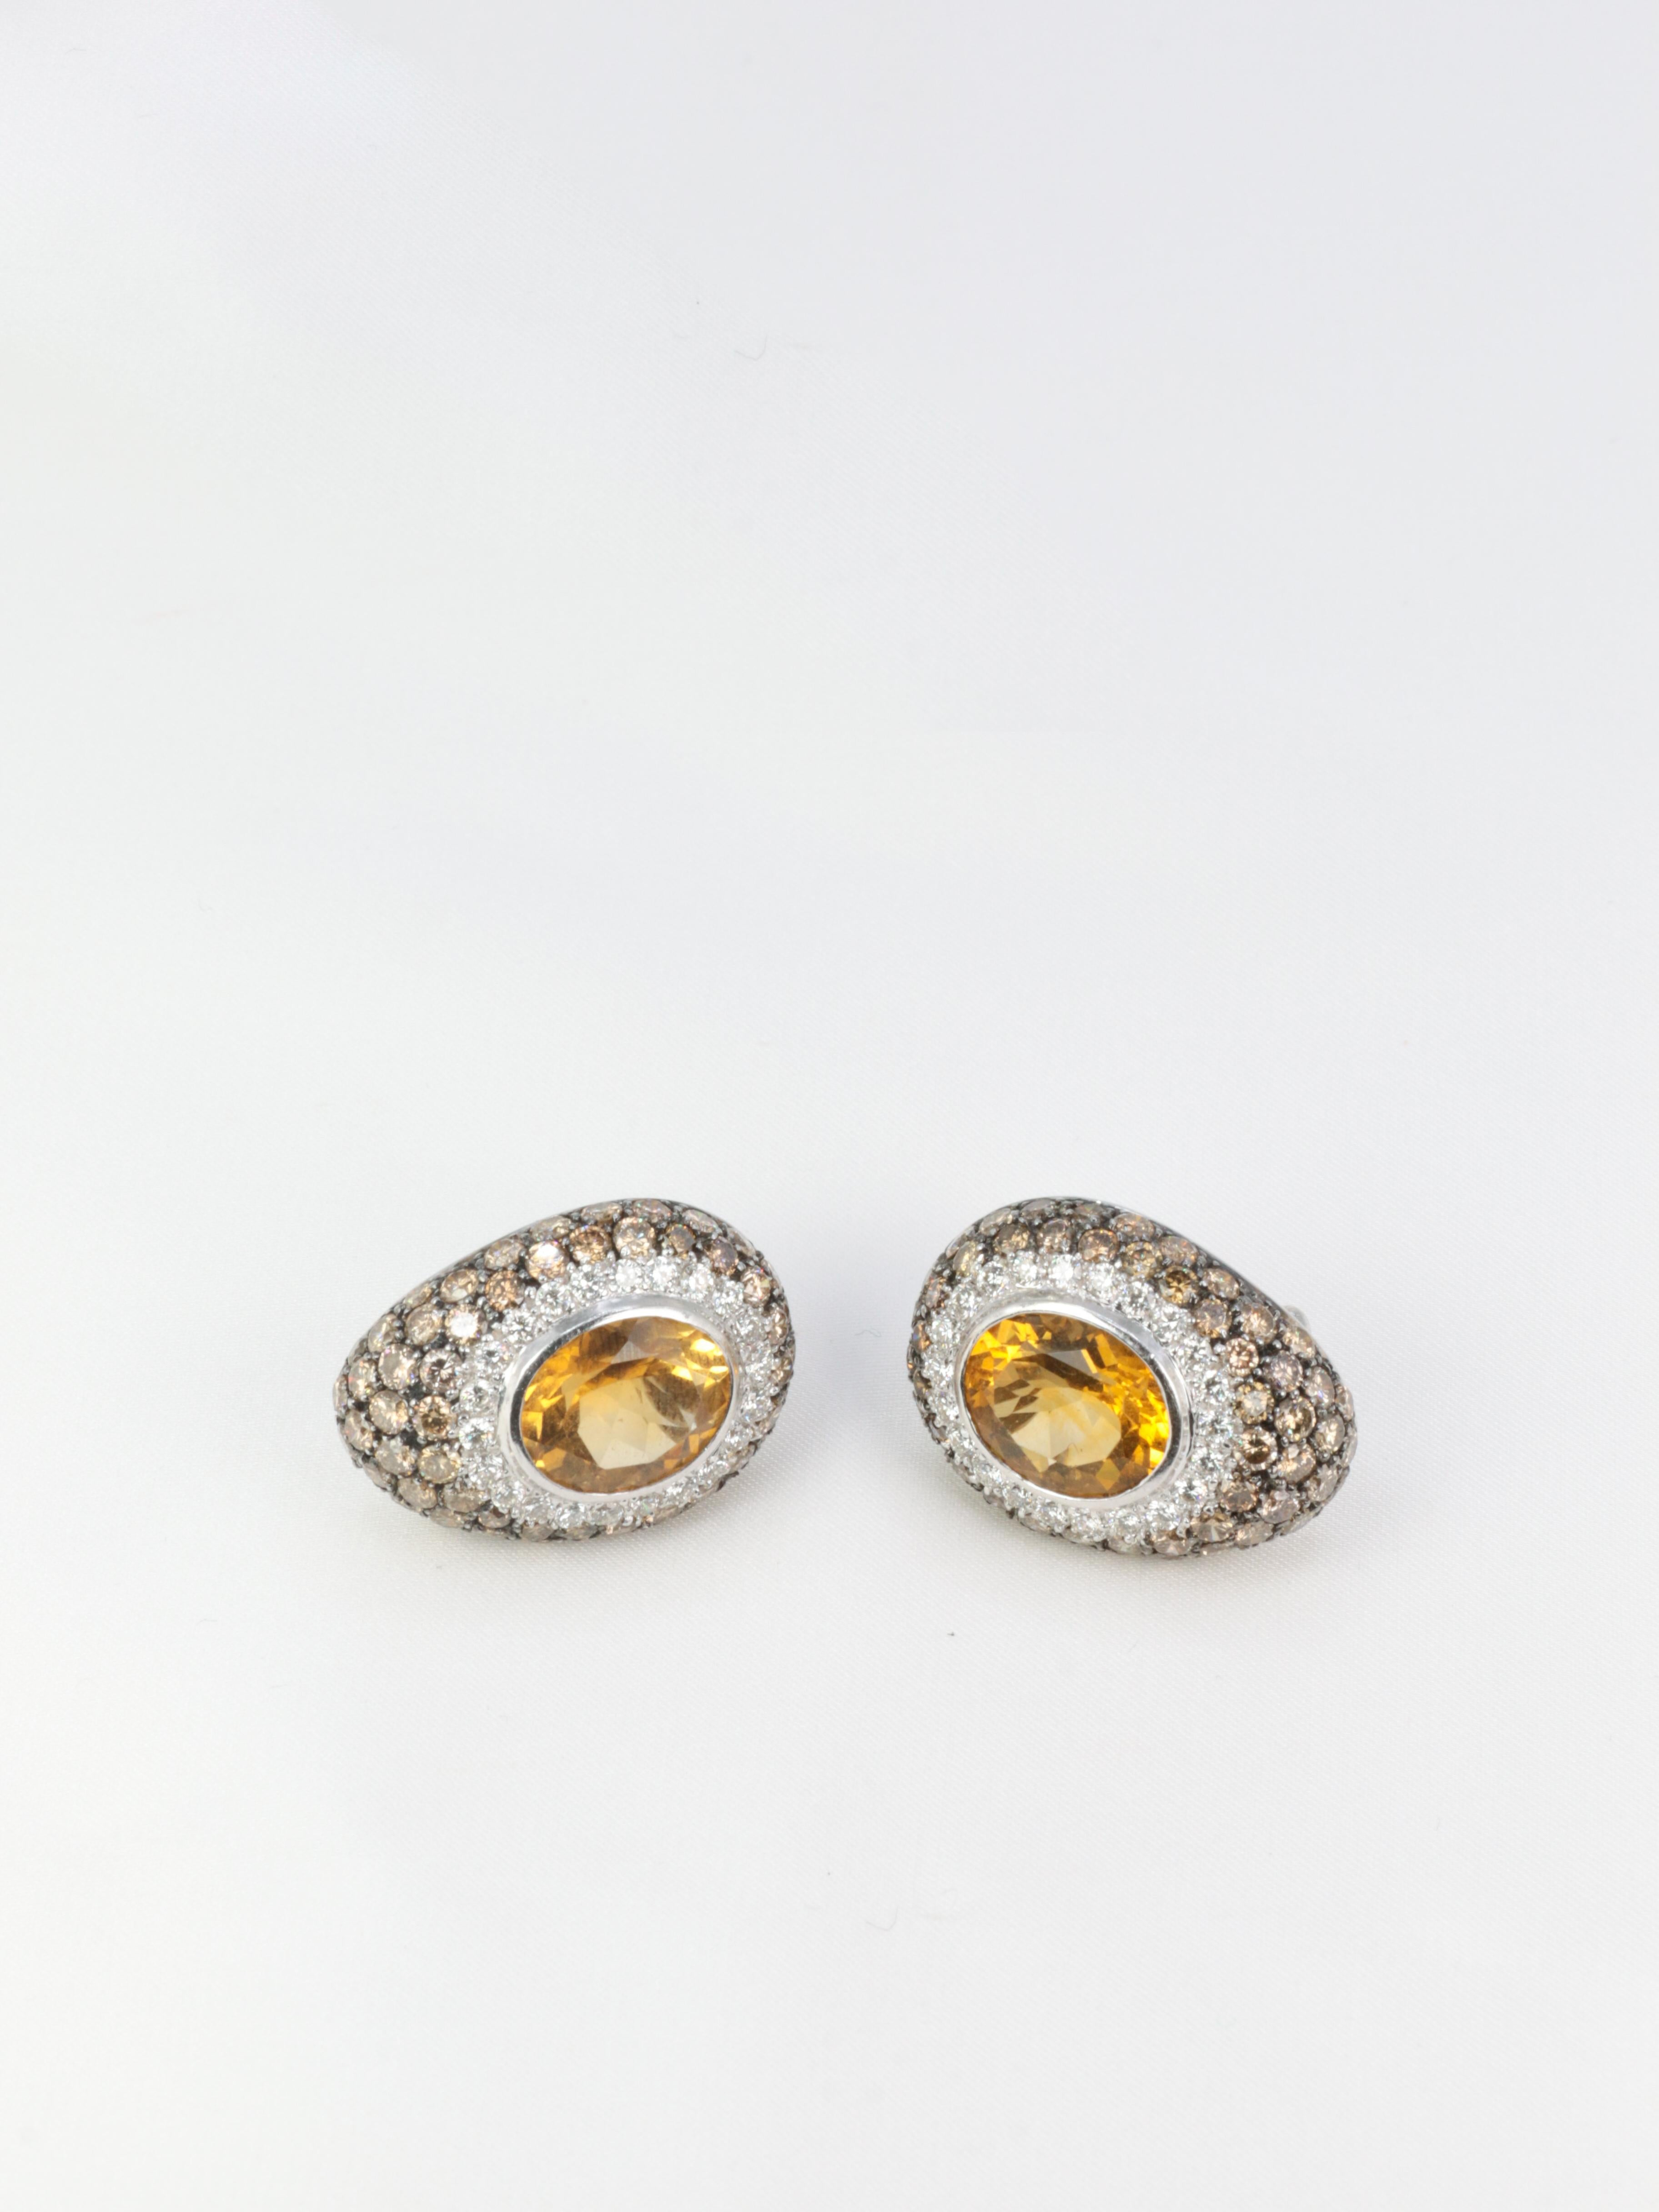 Pair of Gold, Citrines, White and Champagne Diamonds Earrings For Sale 2